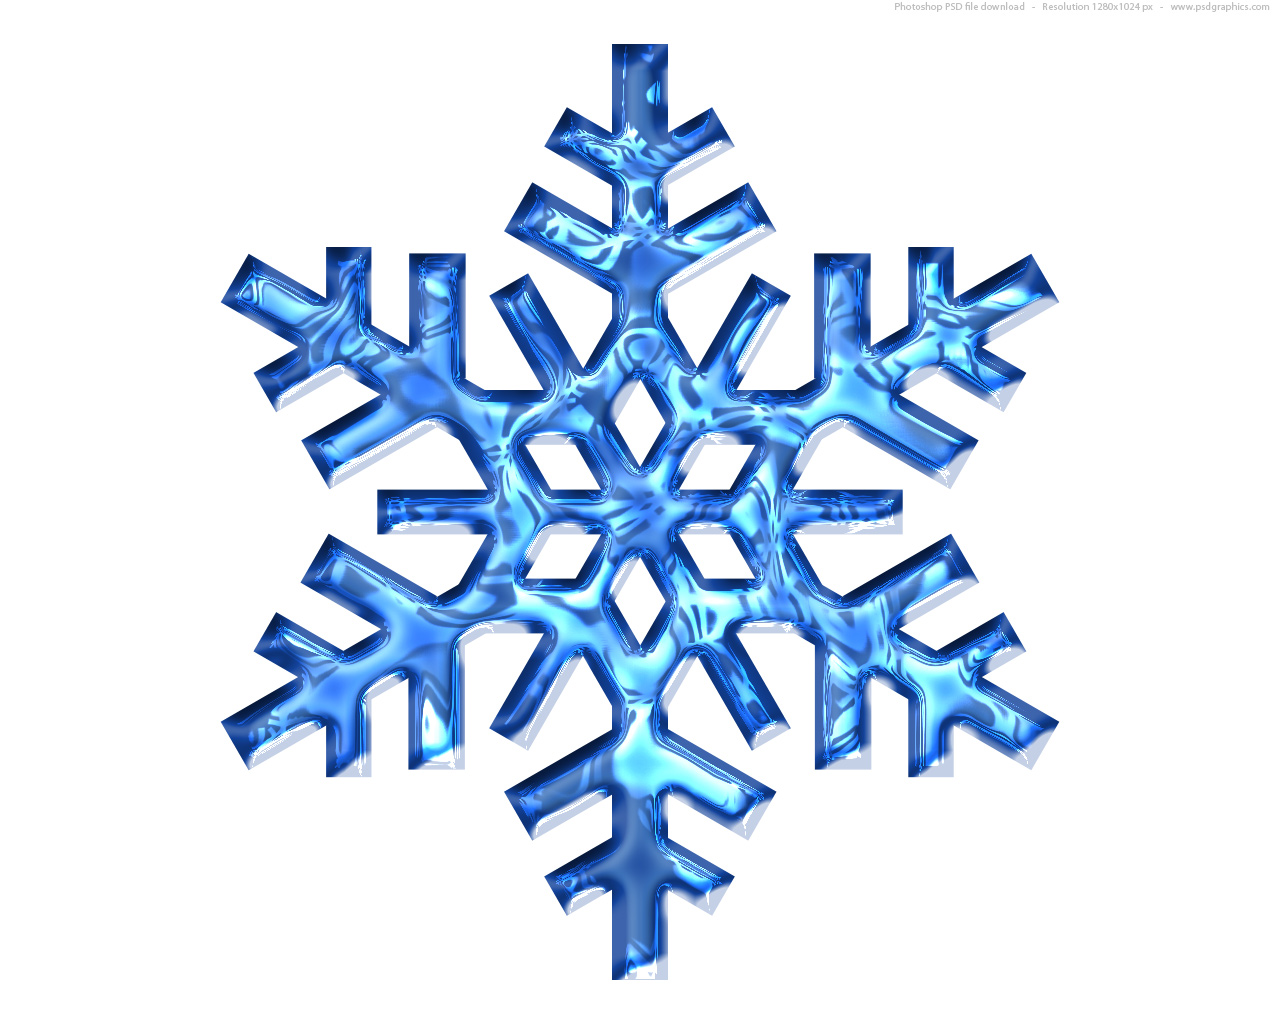 Winter Snowflakes Clipart   Clipart Panda   Free Clipart Images